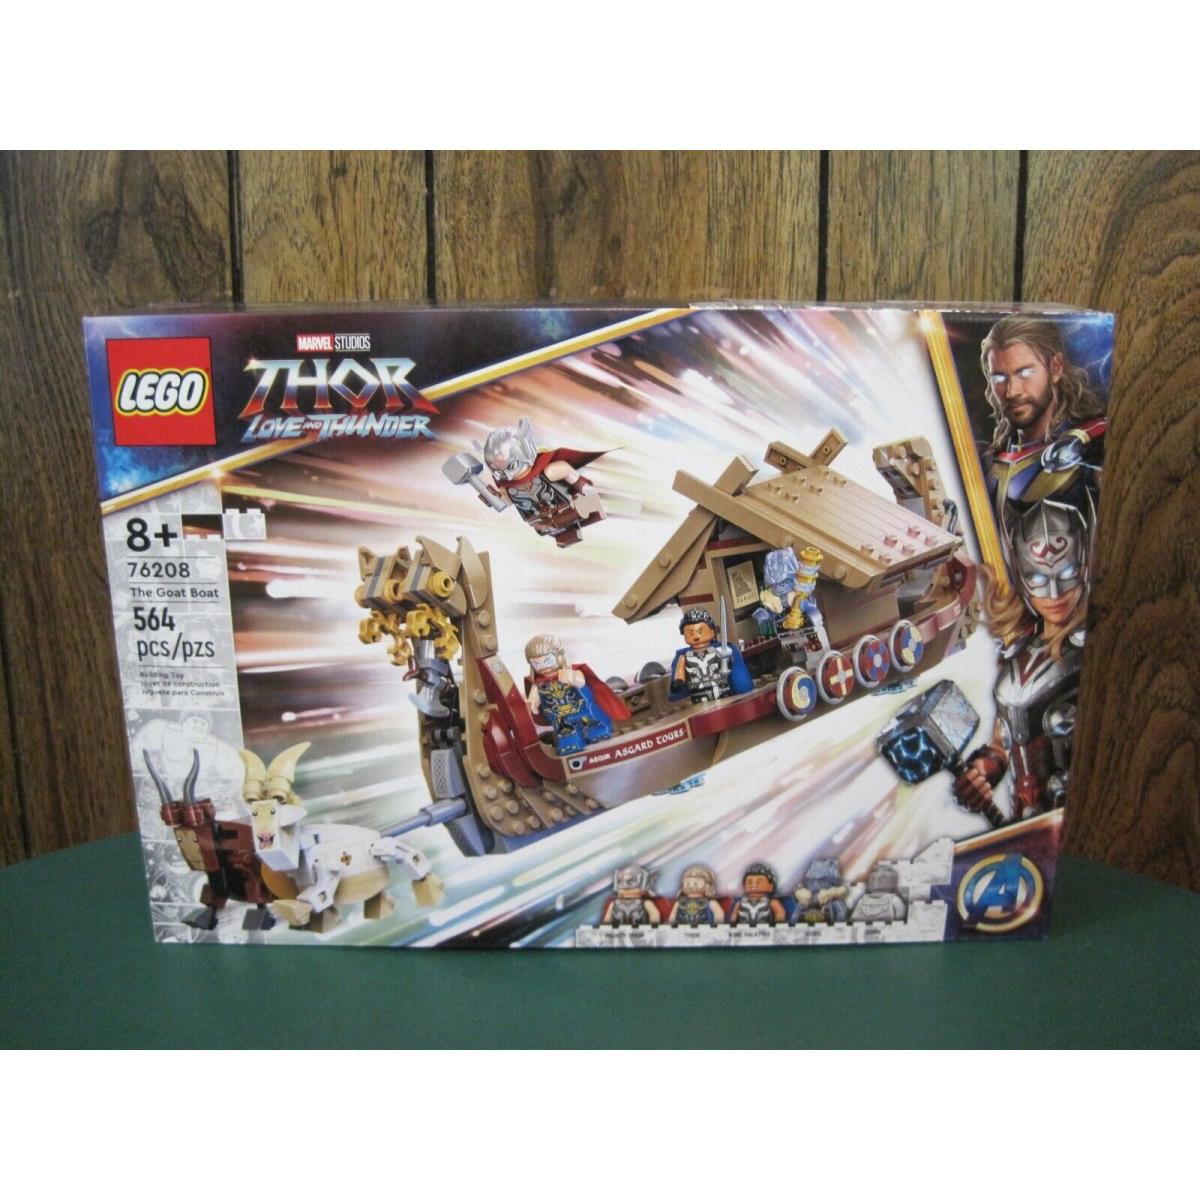 2022 Lego 76208 Marvel Thor Love and Thunder The Goat Boat 564 Pieces--new